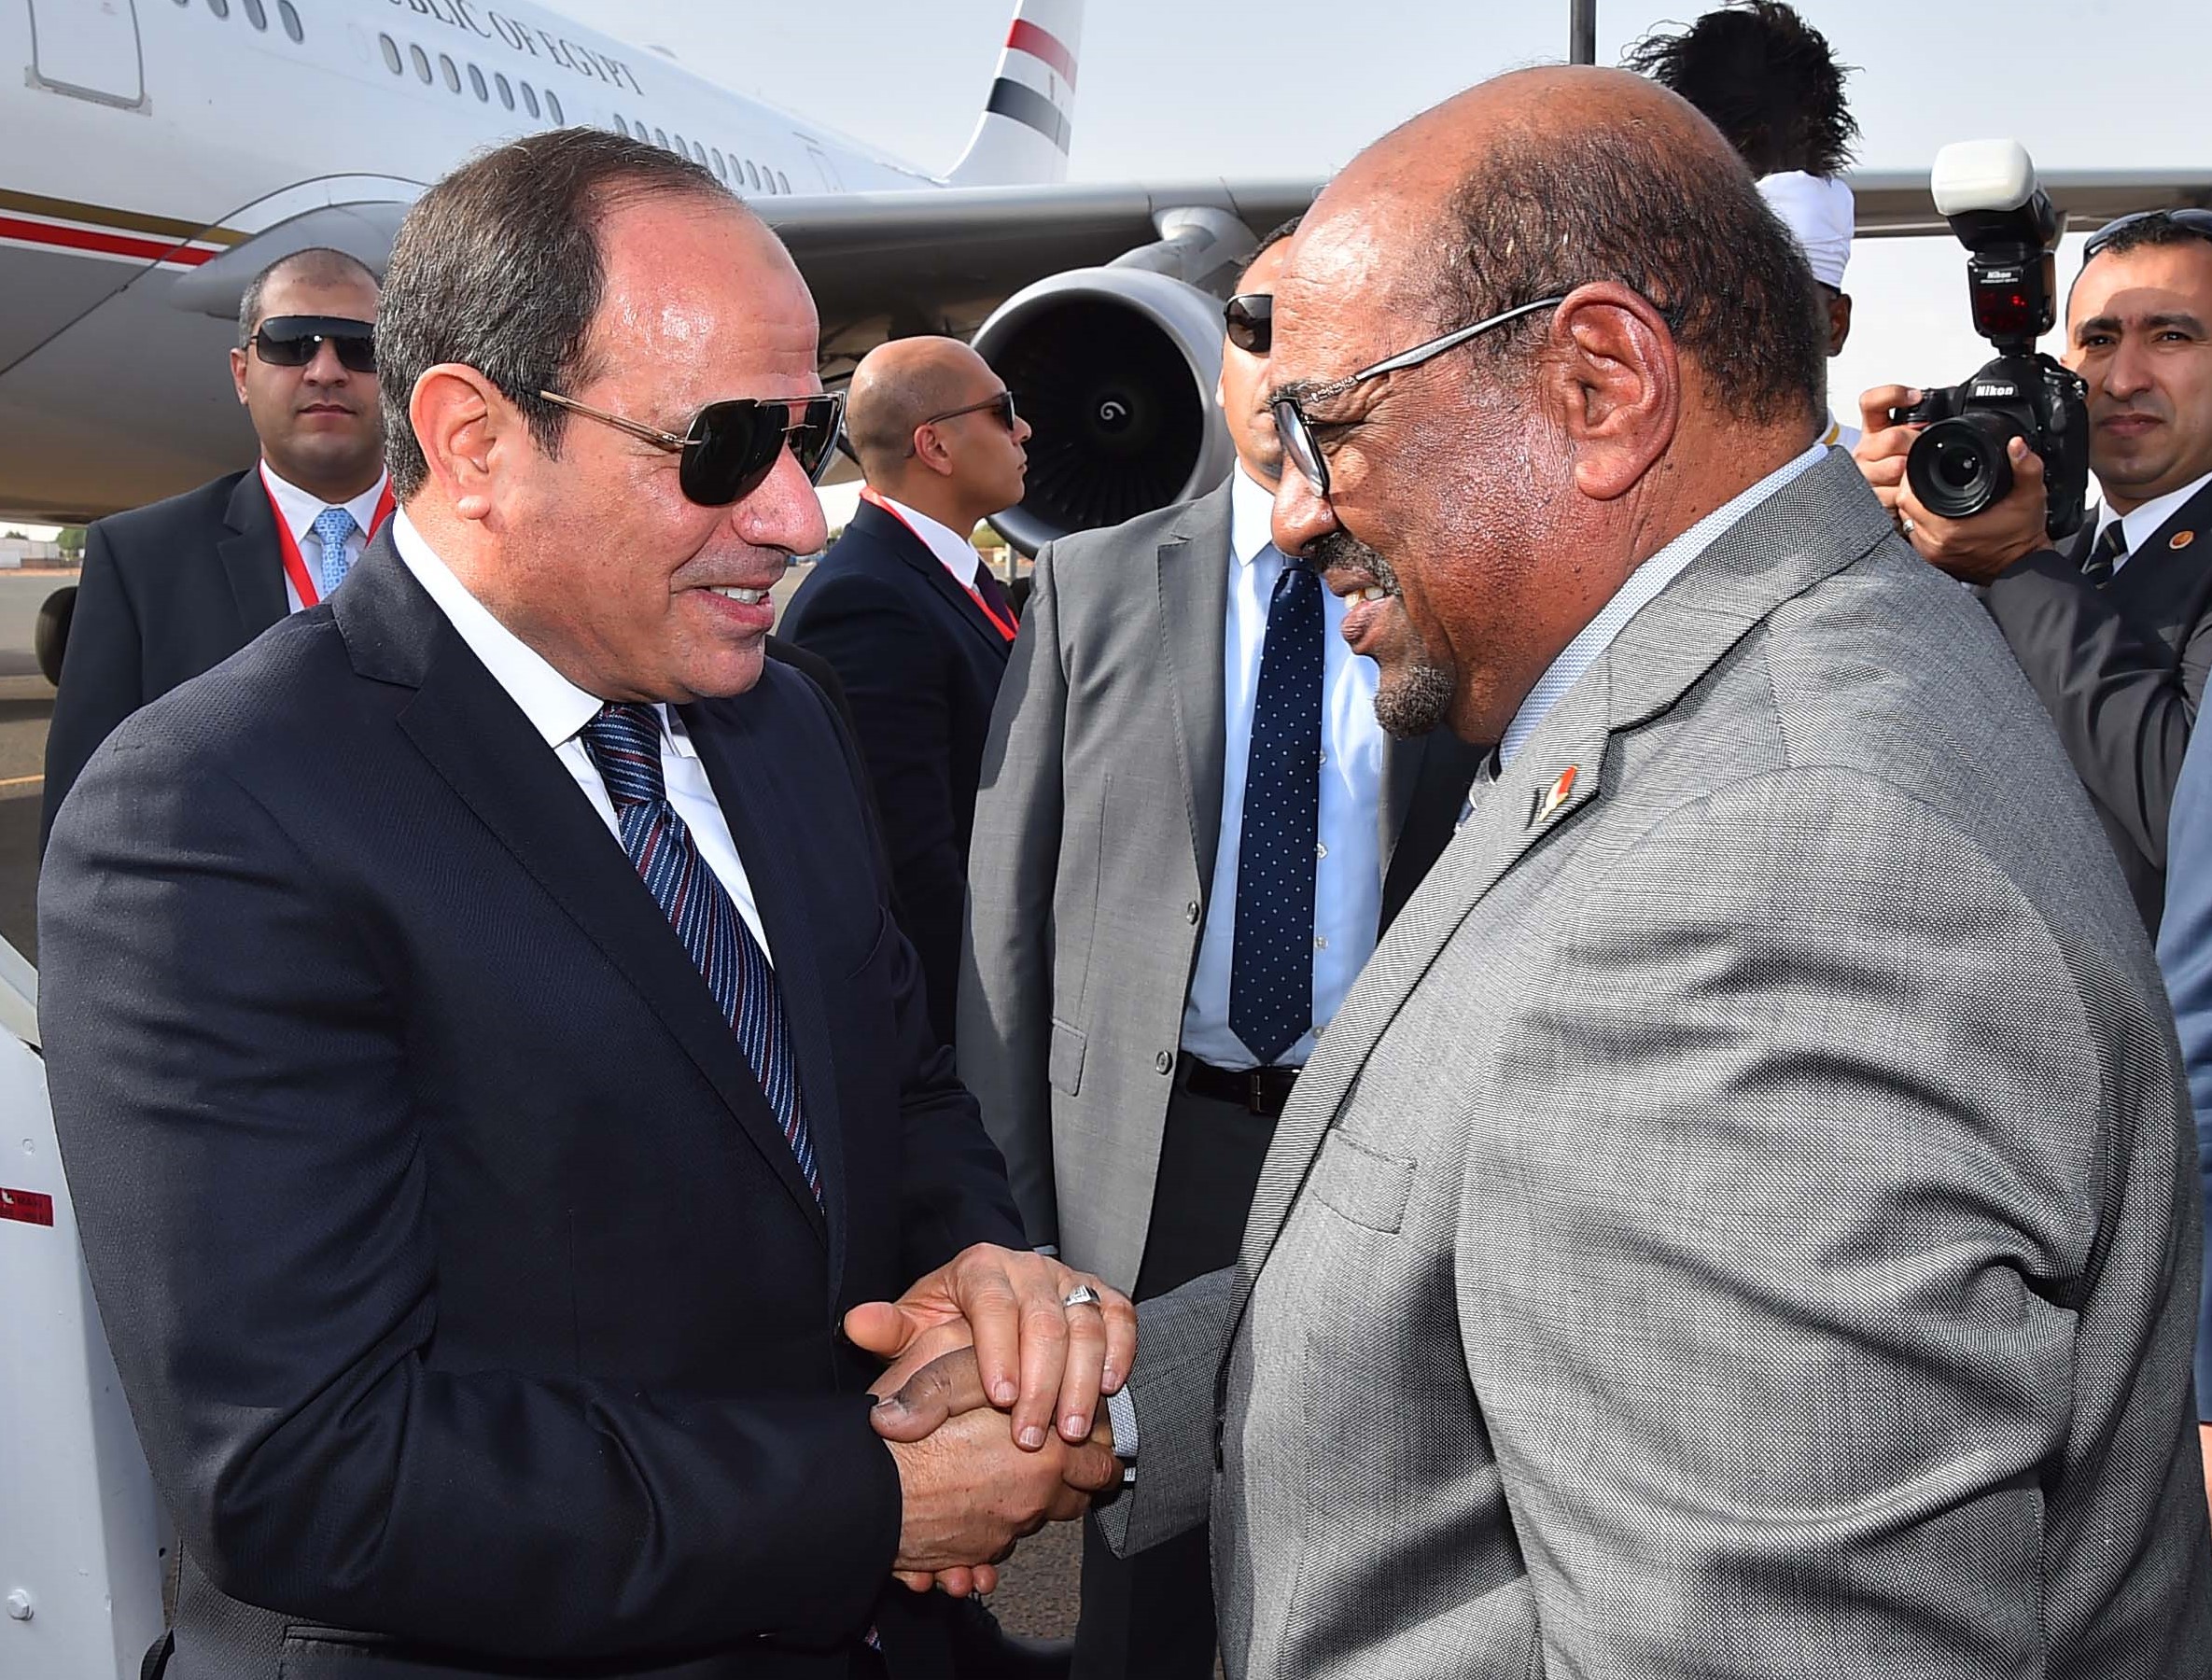 Sudanese President Omar al-Bashir (R) greeting his Egyptian counterpart Abdel Fattah al-Sisi upon his arrival at Khartoum International Airport in the Sudanese capital on 19 July 2018 (AFP)